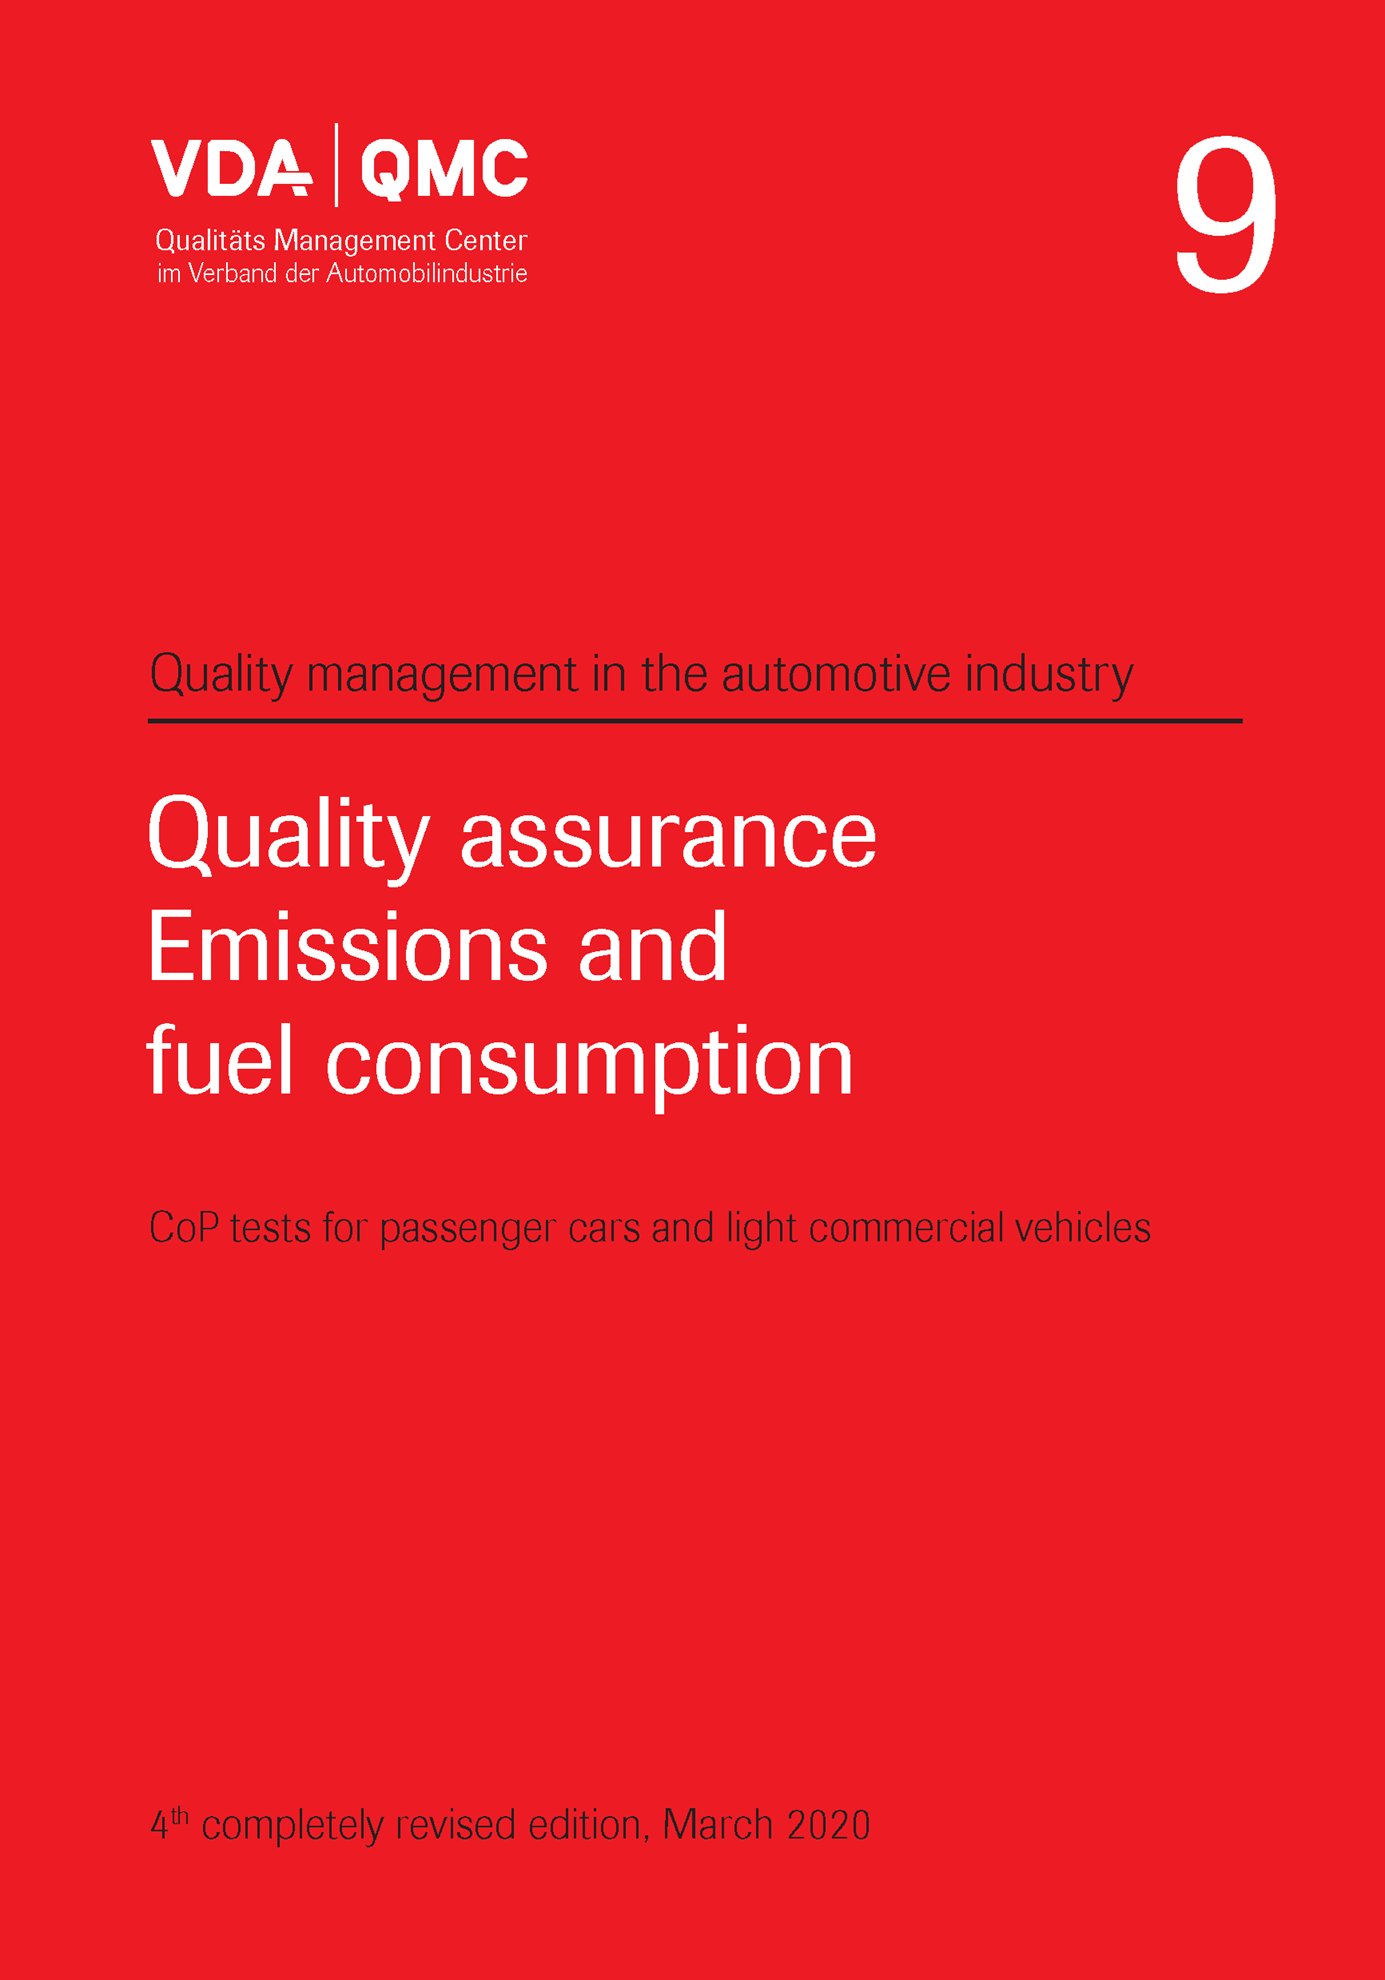 Publikation  VDA Volume 9
 Quality Assurance
 Emissions and Fuel Consumption
 CoP tests on passenger cars and light commercial vehicles, 4th, completely revised edition, March 2020 1.3.2020 Ansicht